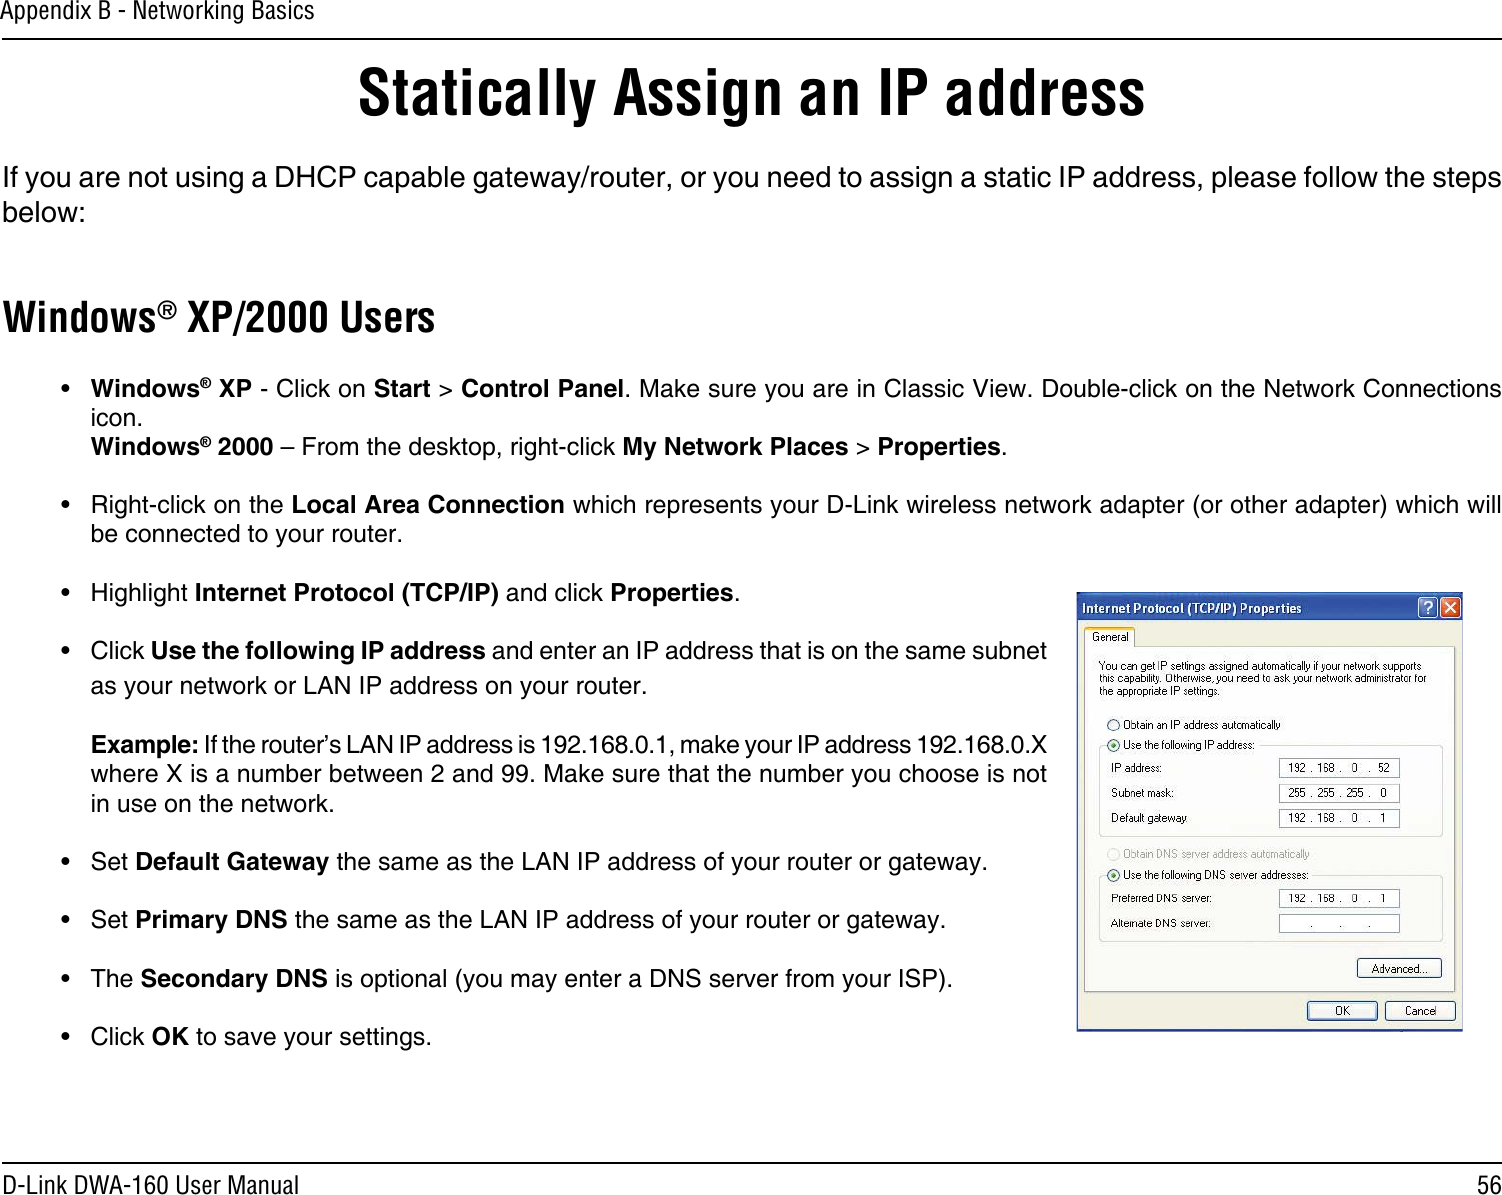 56D-Link DWA-160 User ManualAppendix B - Networking BasicsStatically Assign an IP addressIf you are not using a DHCP capable gateway/router, or you need to assign a static IP address, please follow the steps below:Windows® XP/2000 Users•  Windows® XP - Click on Start &gt; Control Panel. Make sure you are in Classic View. Double-click on the Network Connections icon. Windows® 2000 – From the desktop, right-click My Network Places &gt; Properties.•  Right-click on the Local Area Connection which represents your D-Link wireless network adapter (or other adapter) which will be connected to your router.•  Highlight Internet Protocol (TCP/IP) and click Properties.•  Click Use the following IP address and enter an IP address that is on the same subnet as your network or LAN IP address on your router. Example: If the router’s LAN IP address is 192.168.0.1, make your IP address 192.168.0.X where X is a number between 2 and 99. Make sure that the number you choose is not in use on the network. •  Set Default Gateway the same as the LAN IP address of your router or gateway.•  Set Primary DNS the same as the LAN IP address of your router or gateway. •  The Secondary DNS is optional (you may enter a DNS server from your ISP).•  Click OK to save your settings.